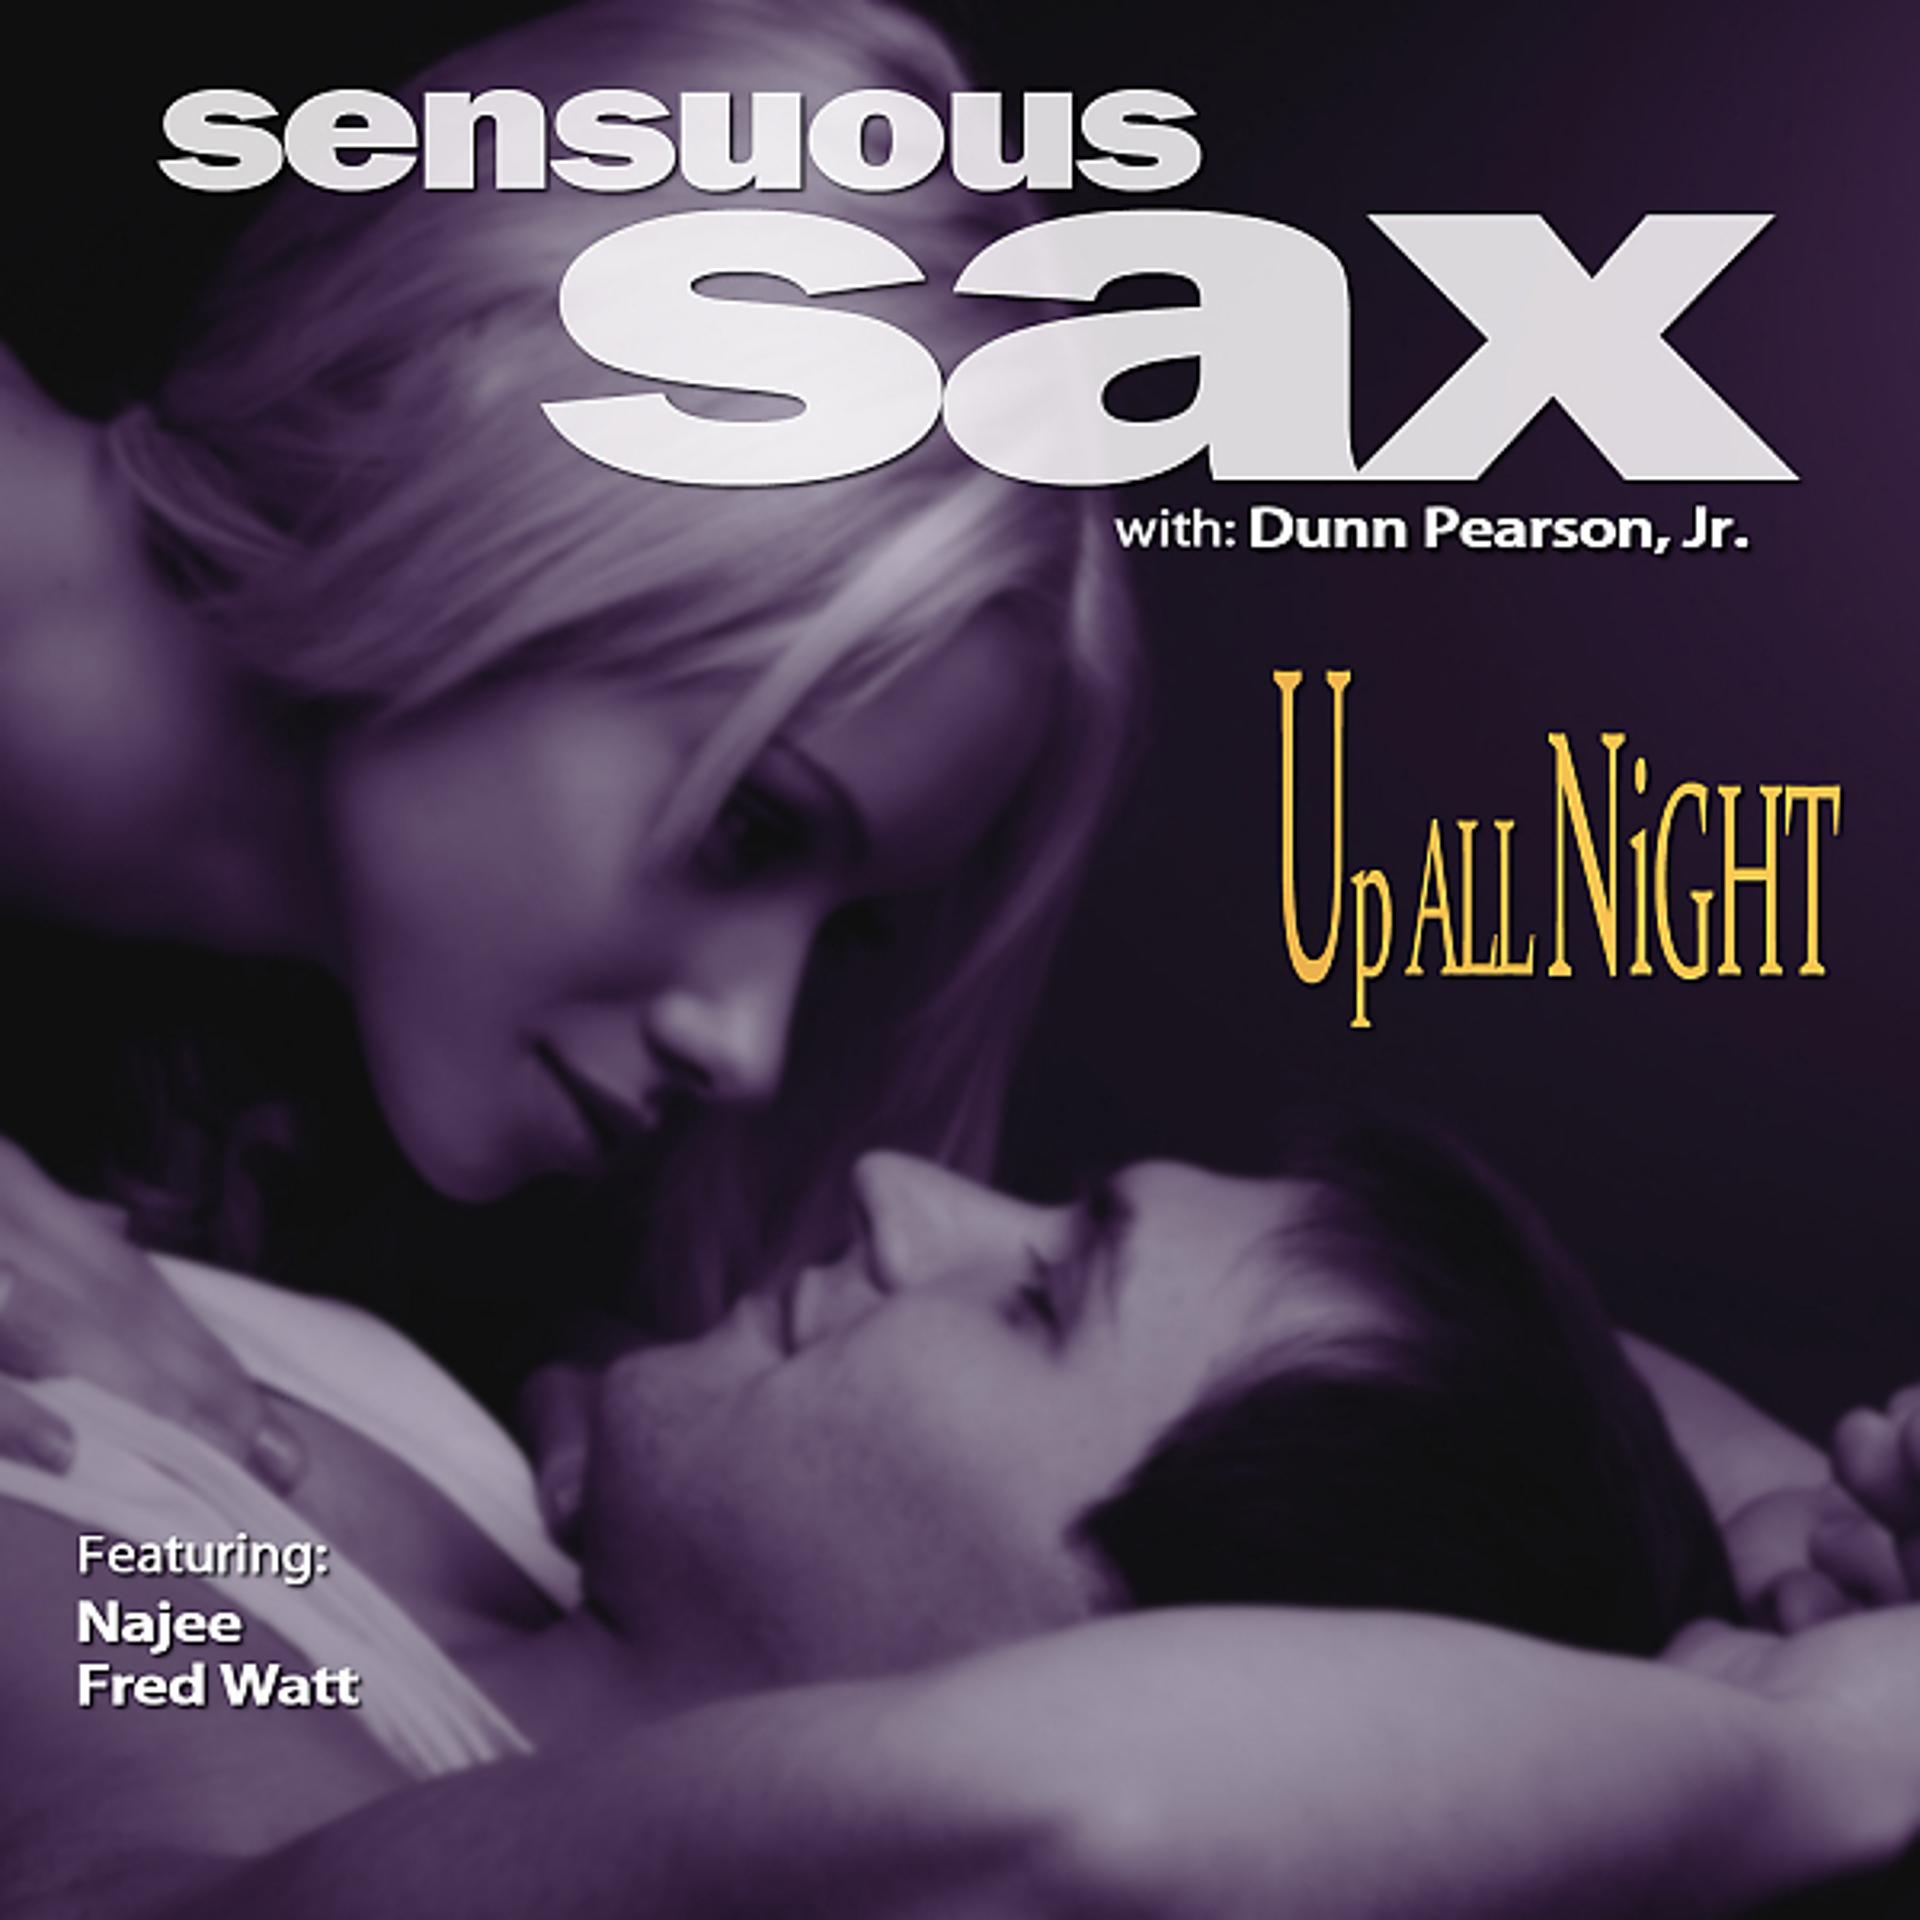 Sensuous Sax - passion (1996). The way Love goes. 2005 - Najee - morning Tenderness.